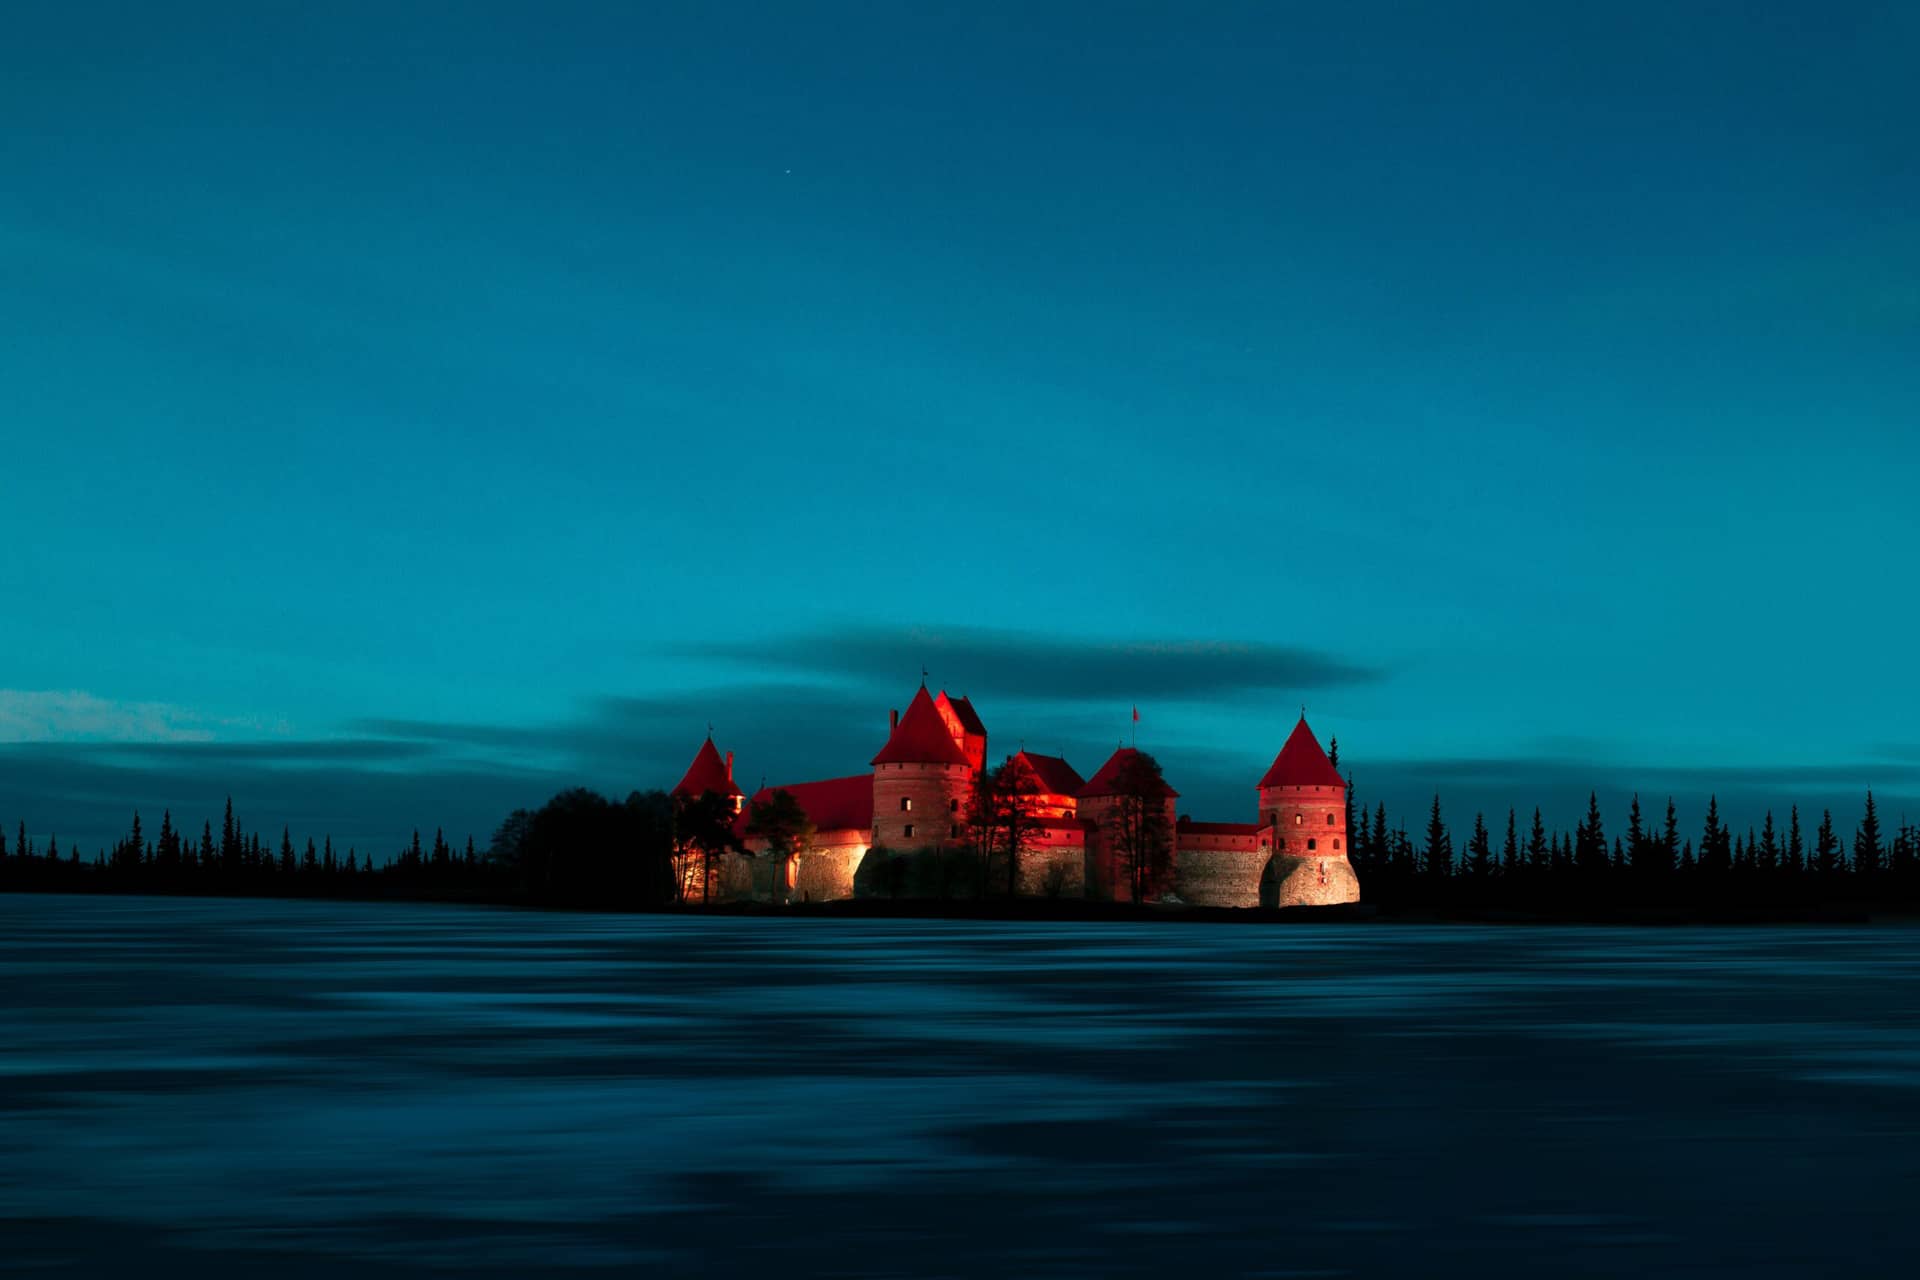 A red brick castle with round towers on an island